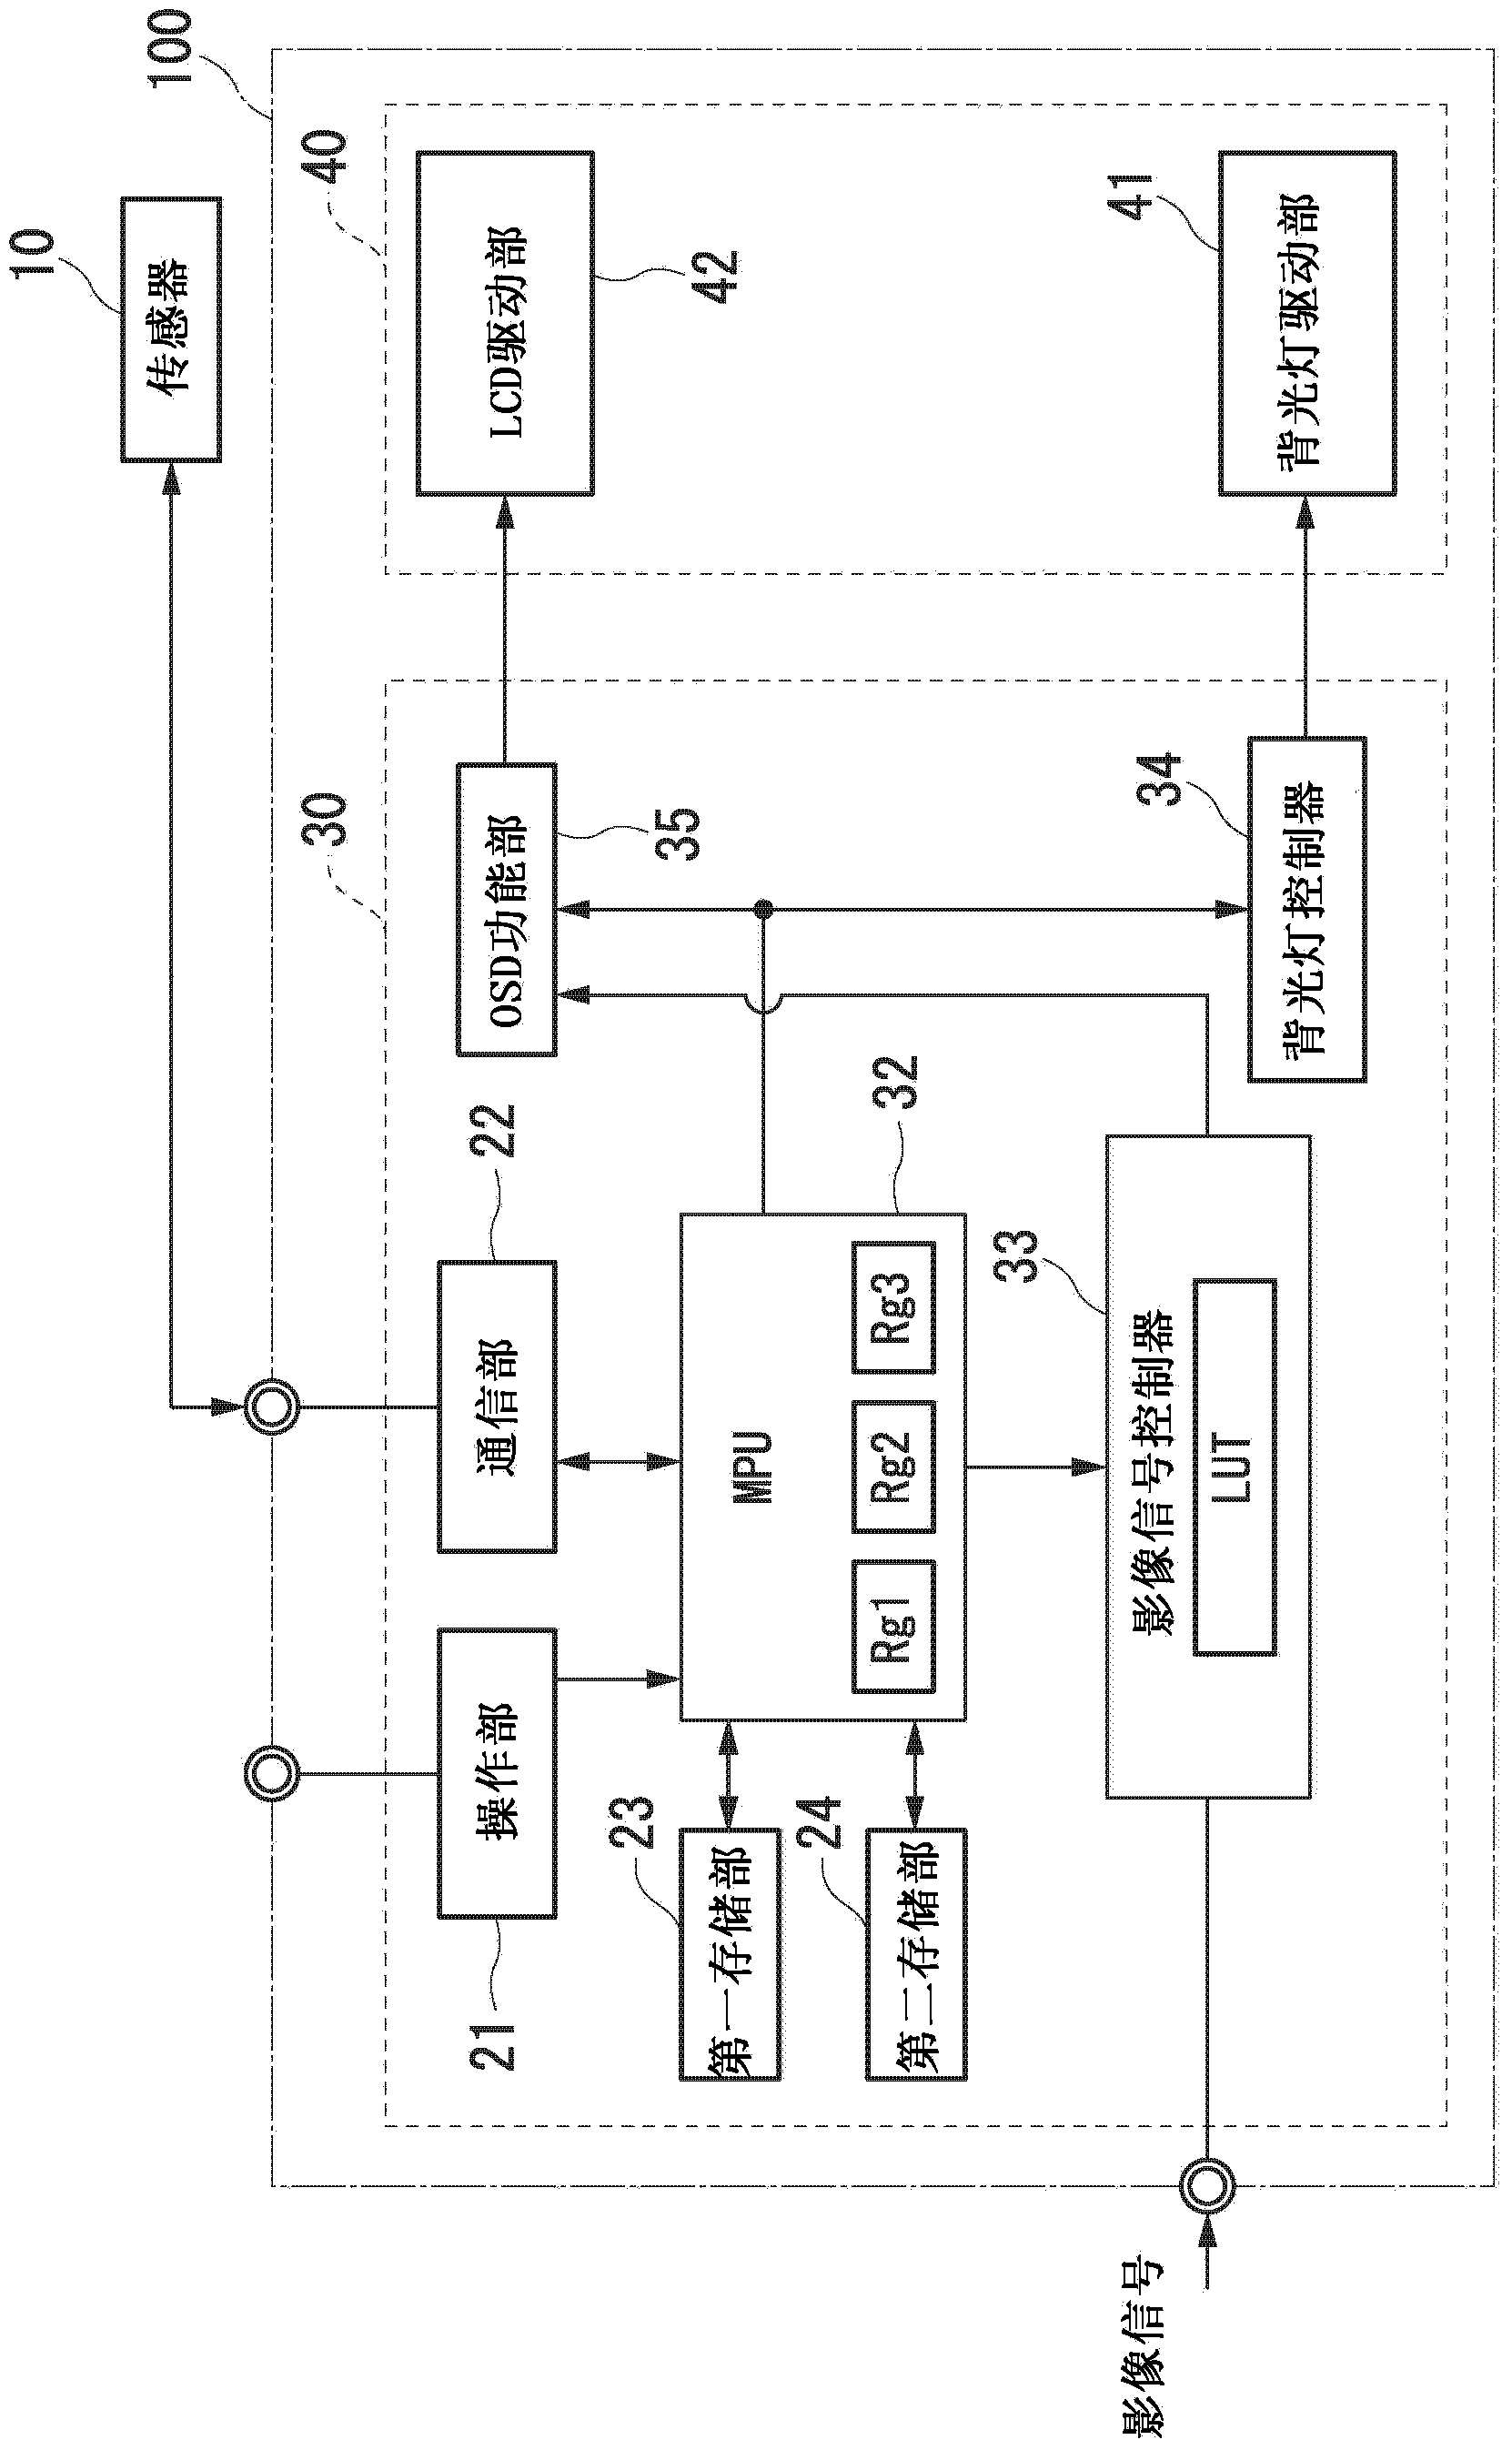 Display device and control method for display device